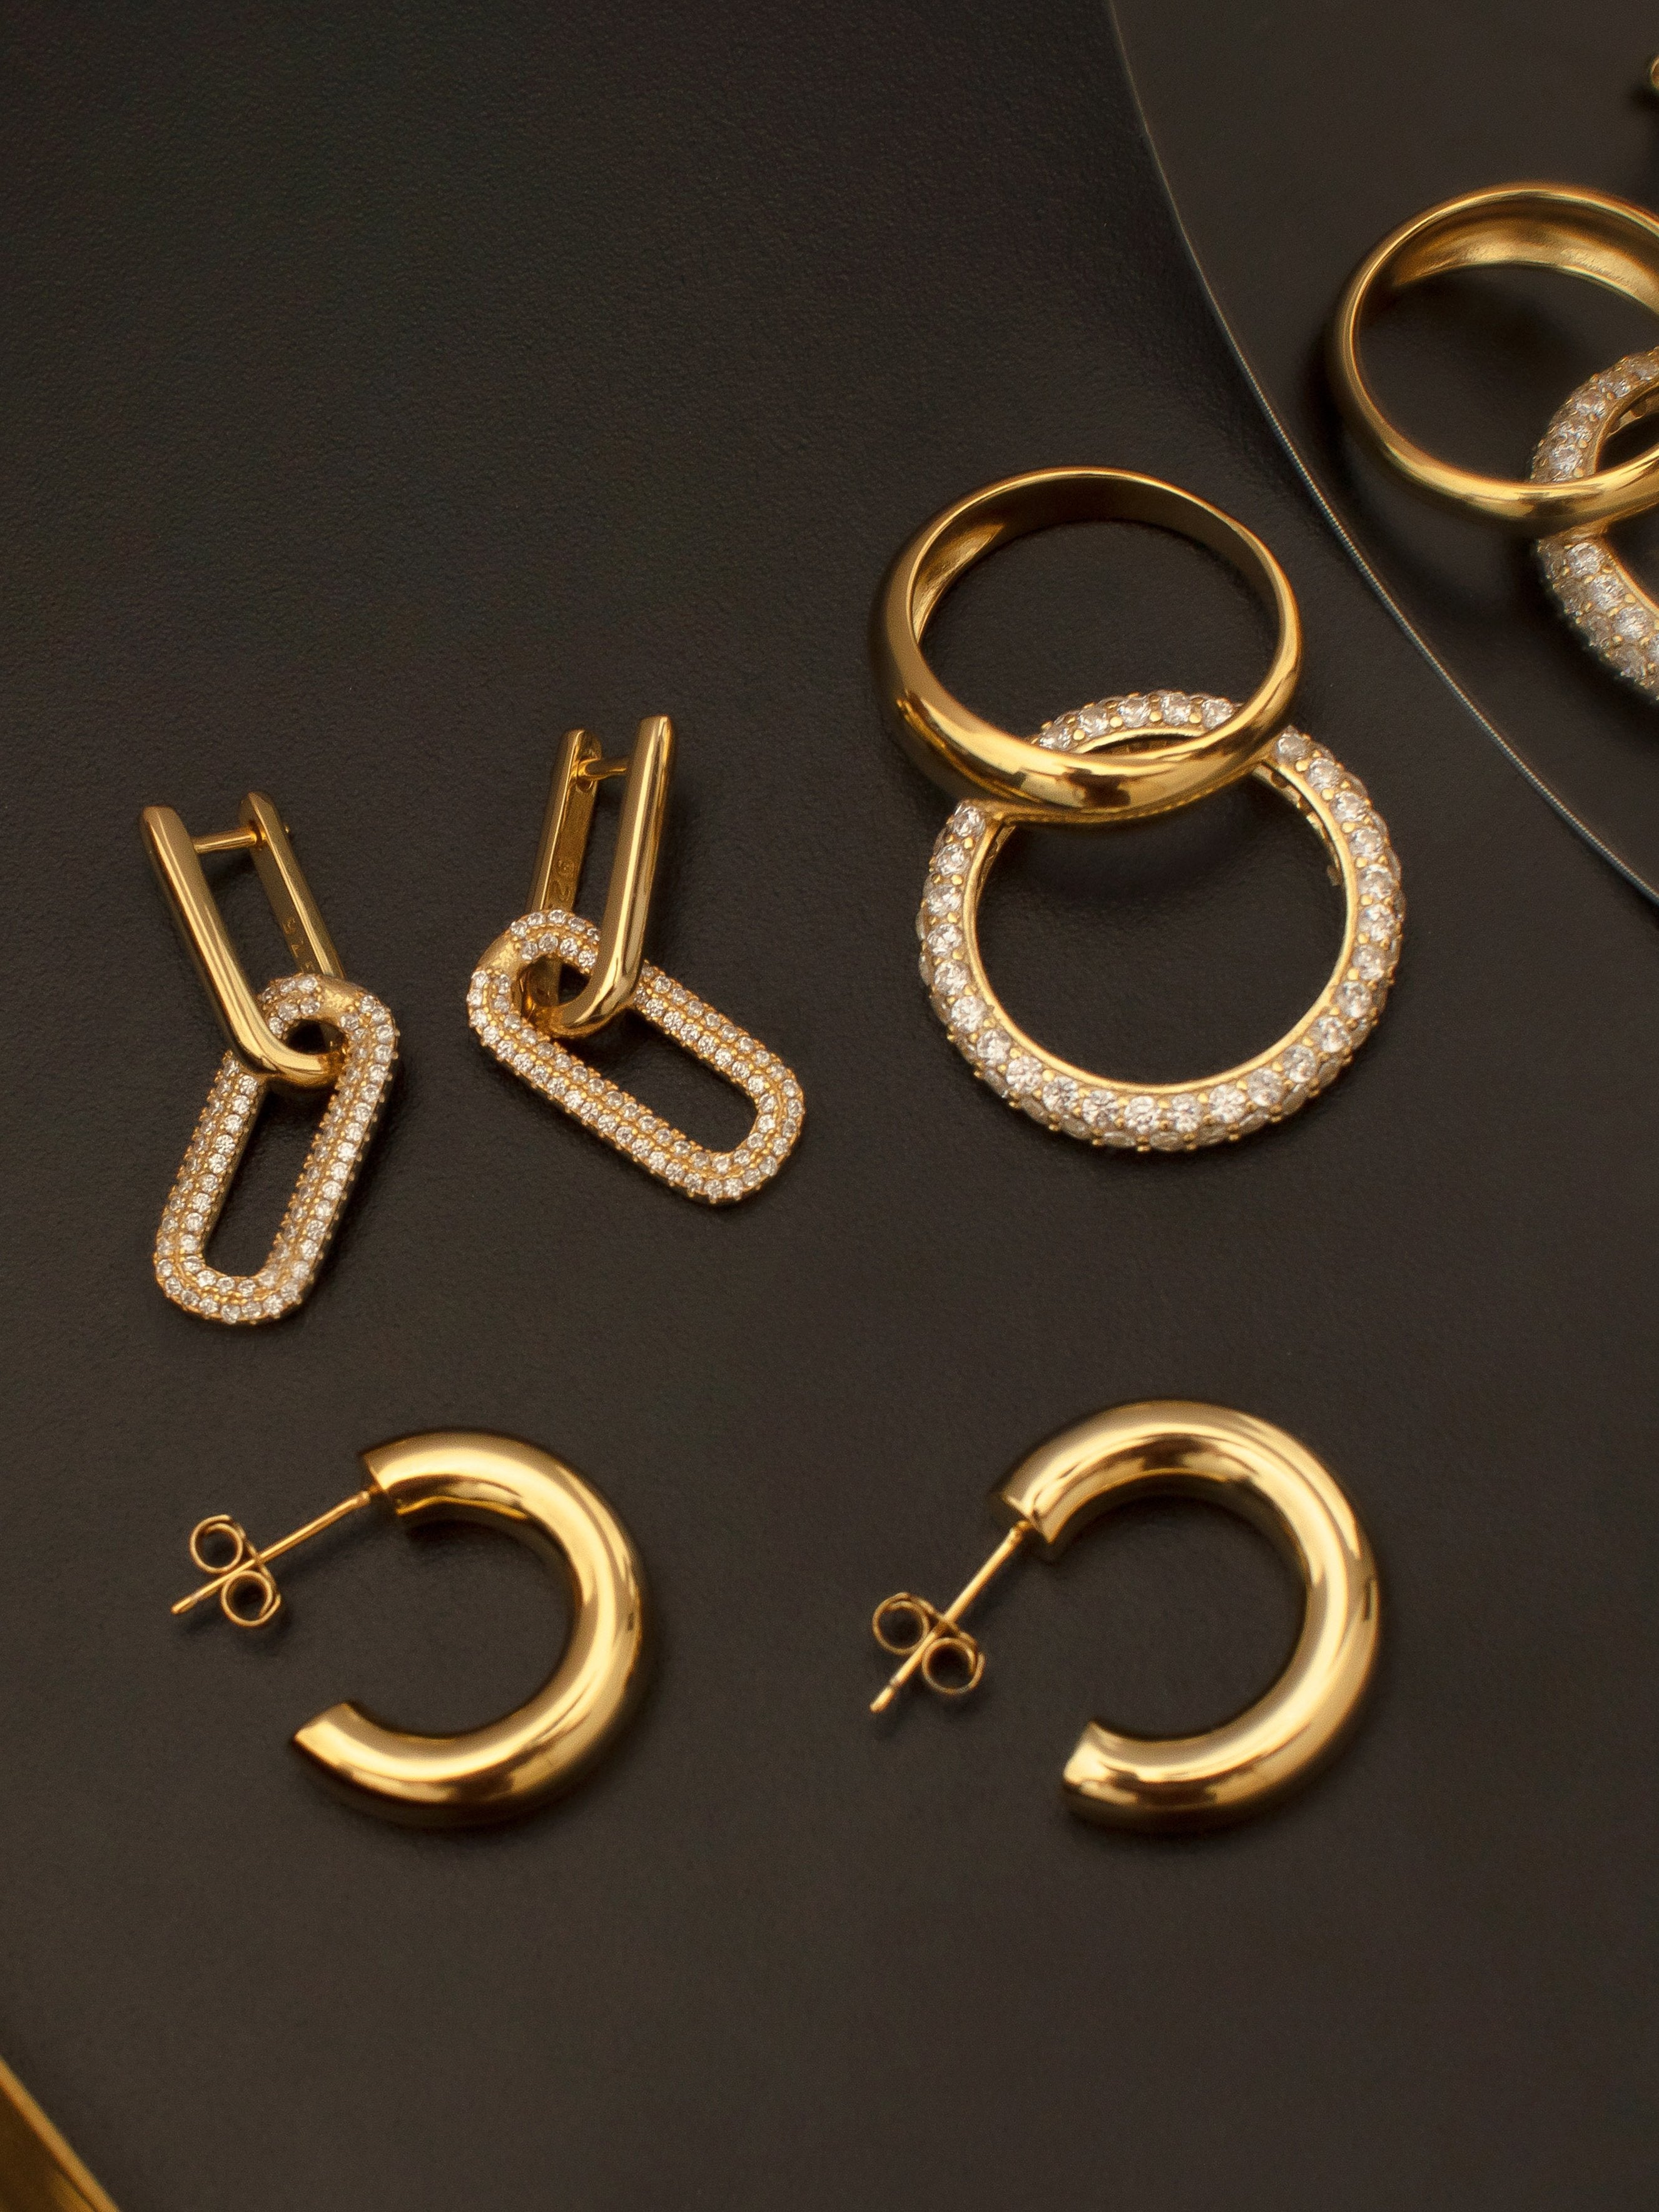 Gold dome rings paired with hoop earrings for women.